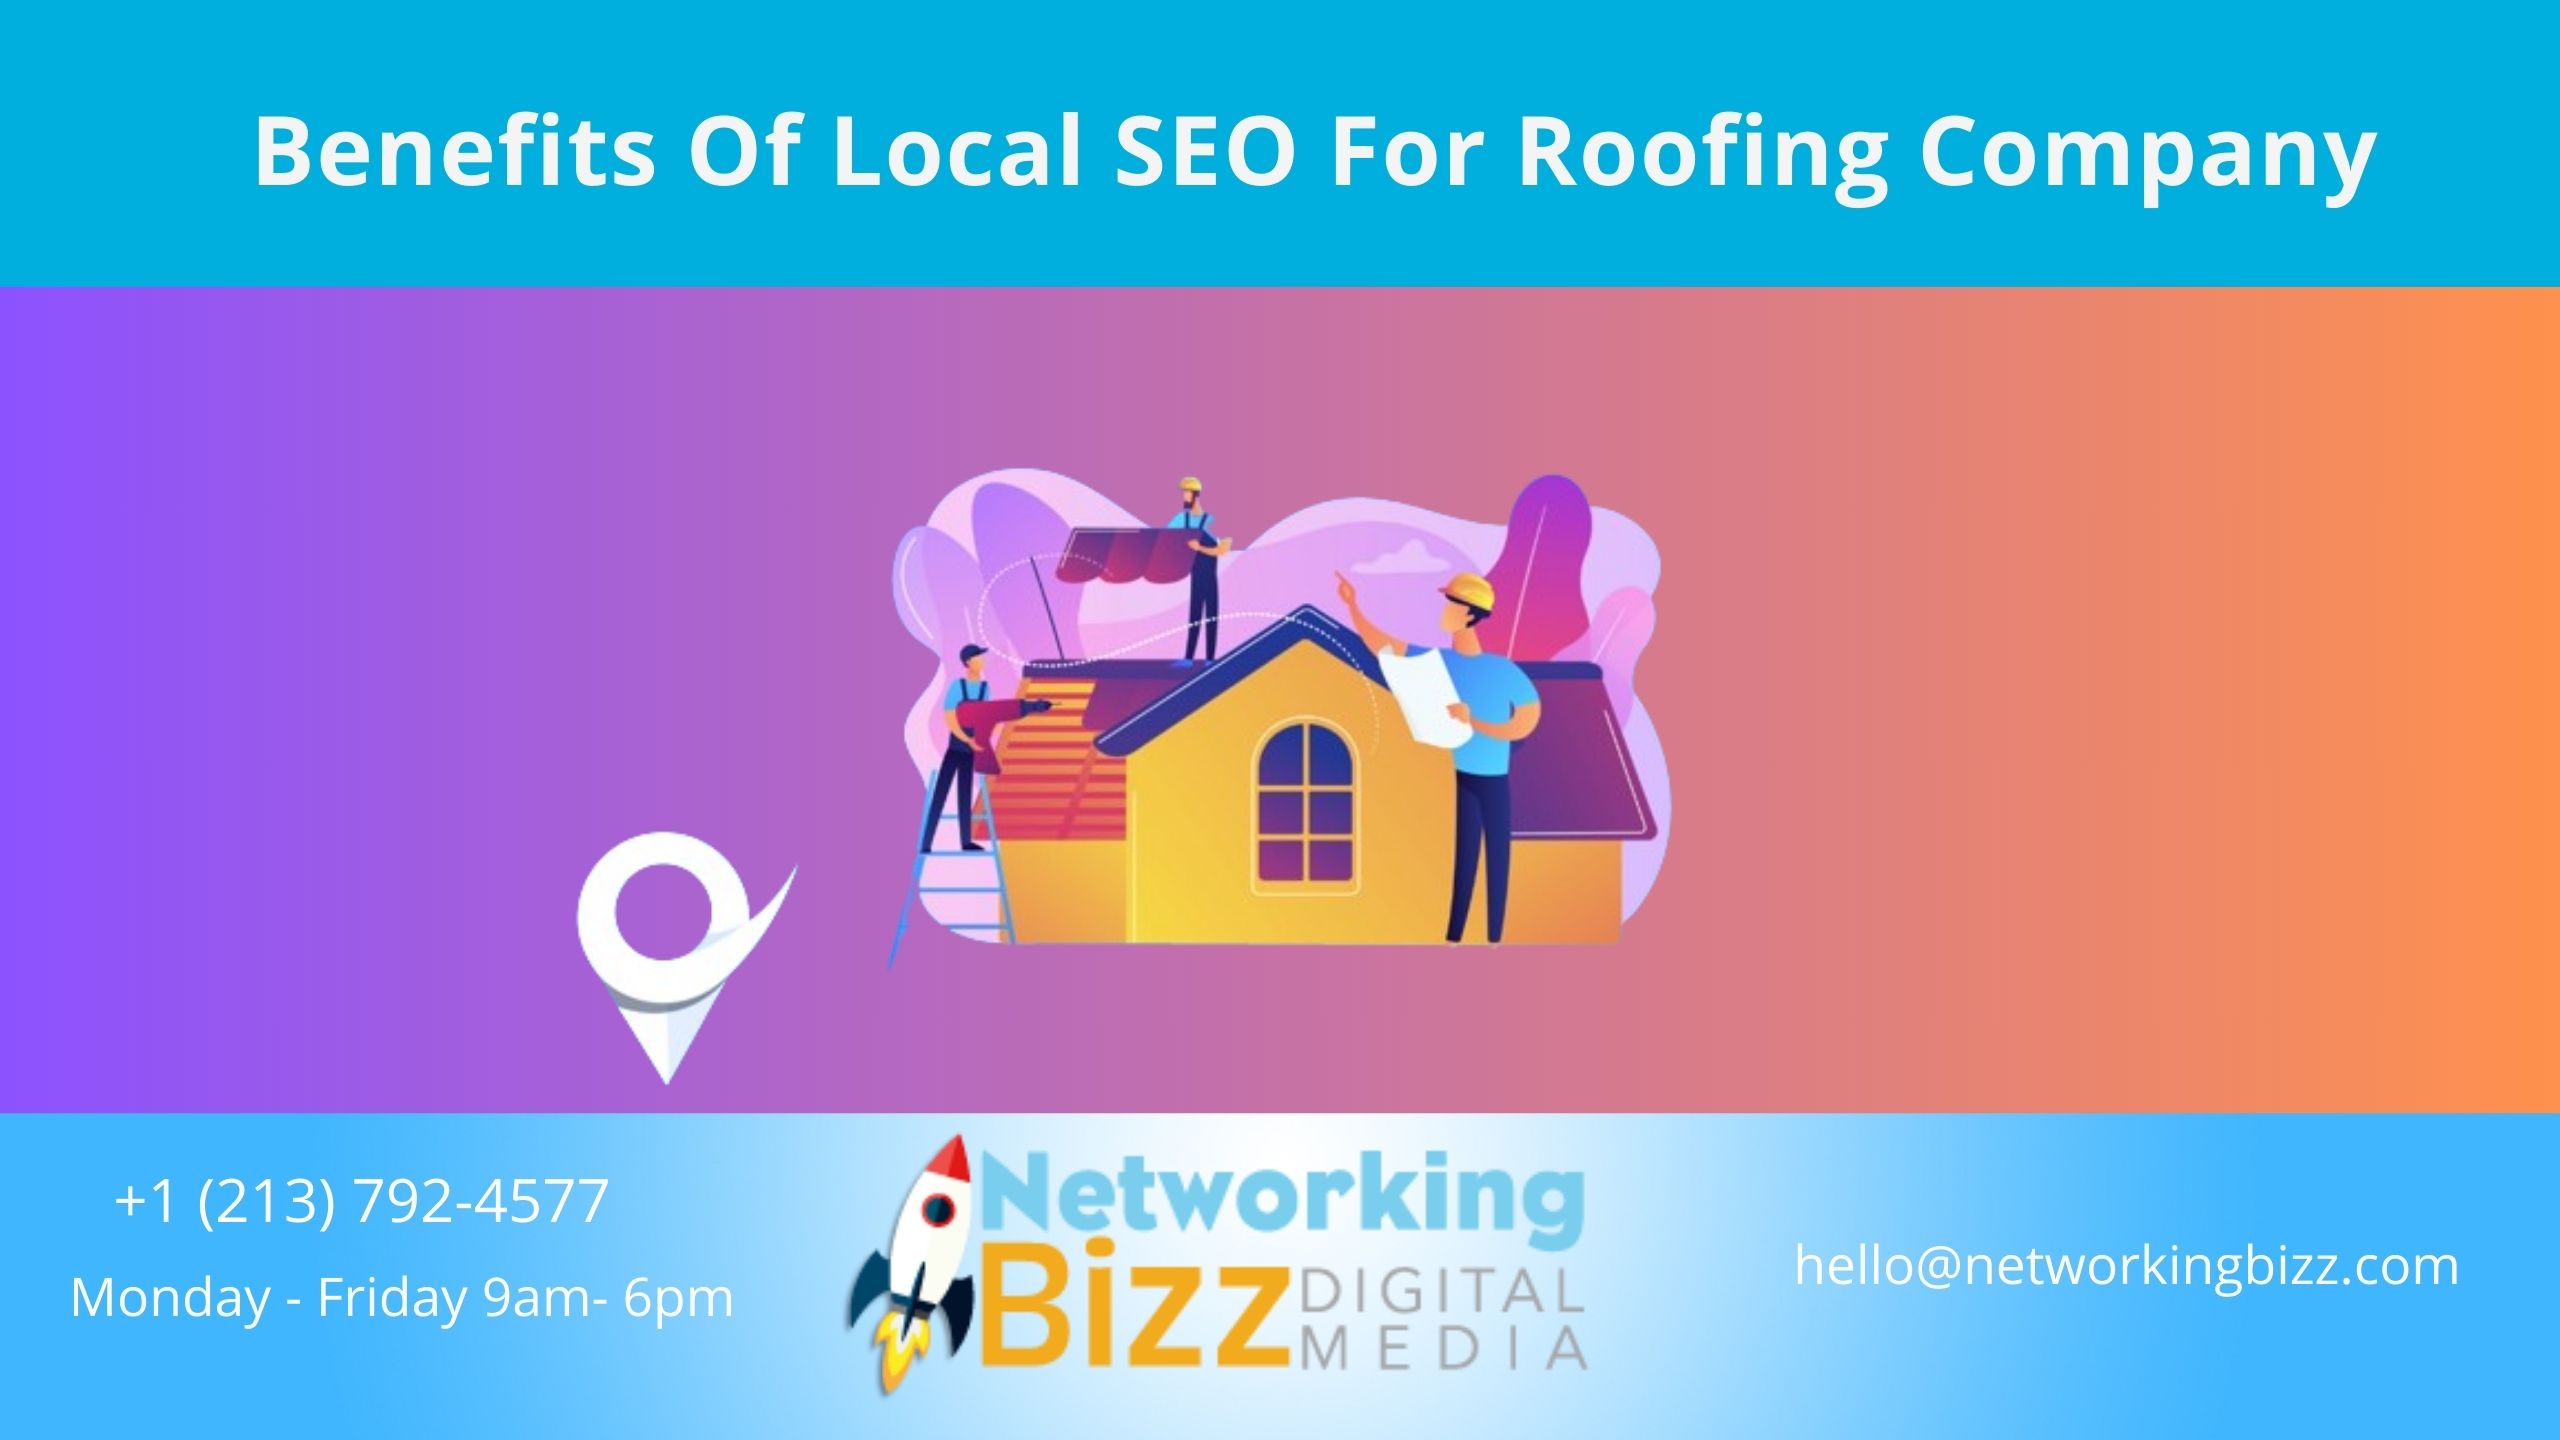 Benefits Of Local SEO For Roofing Company